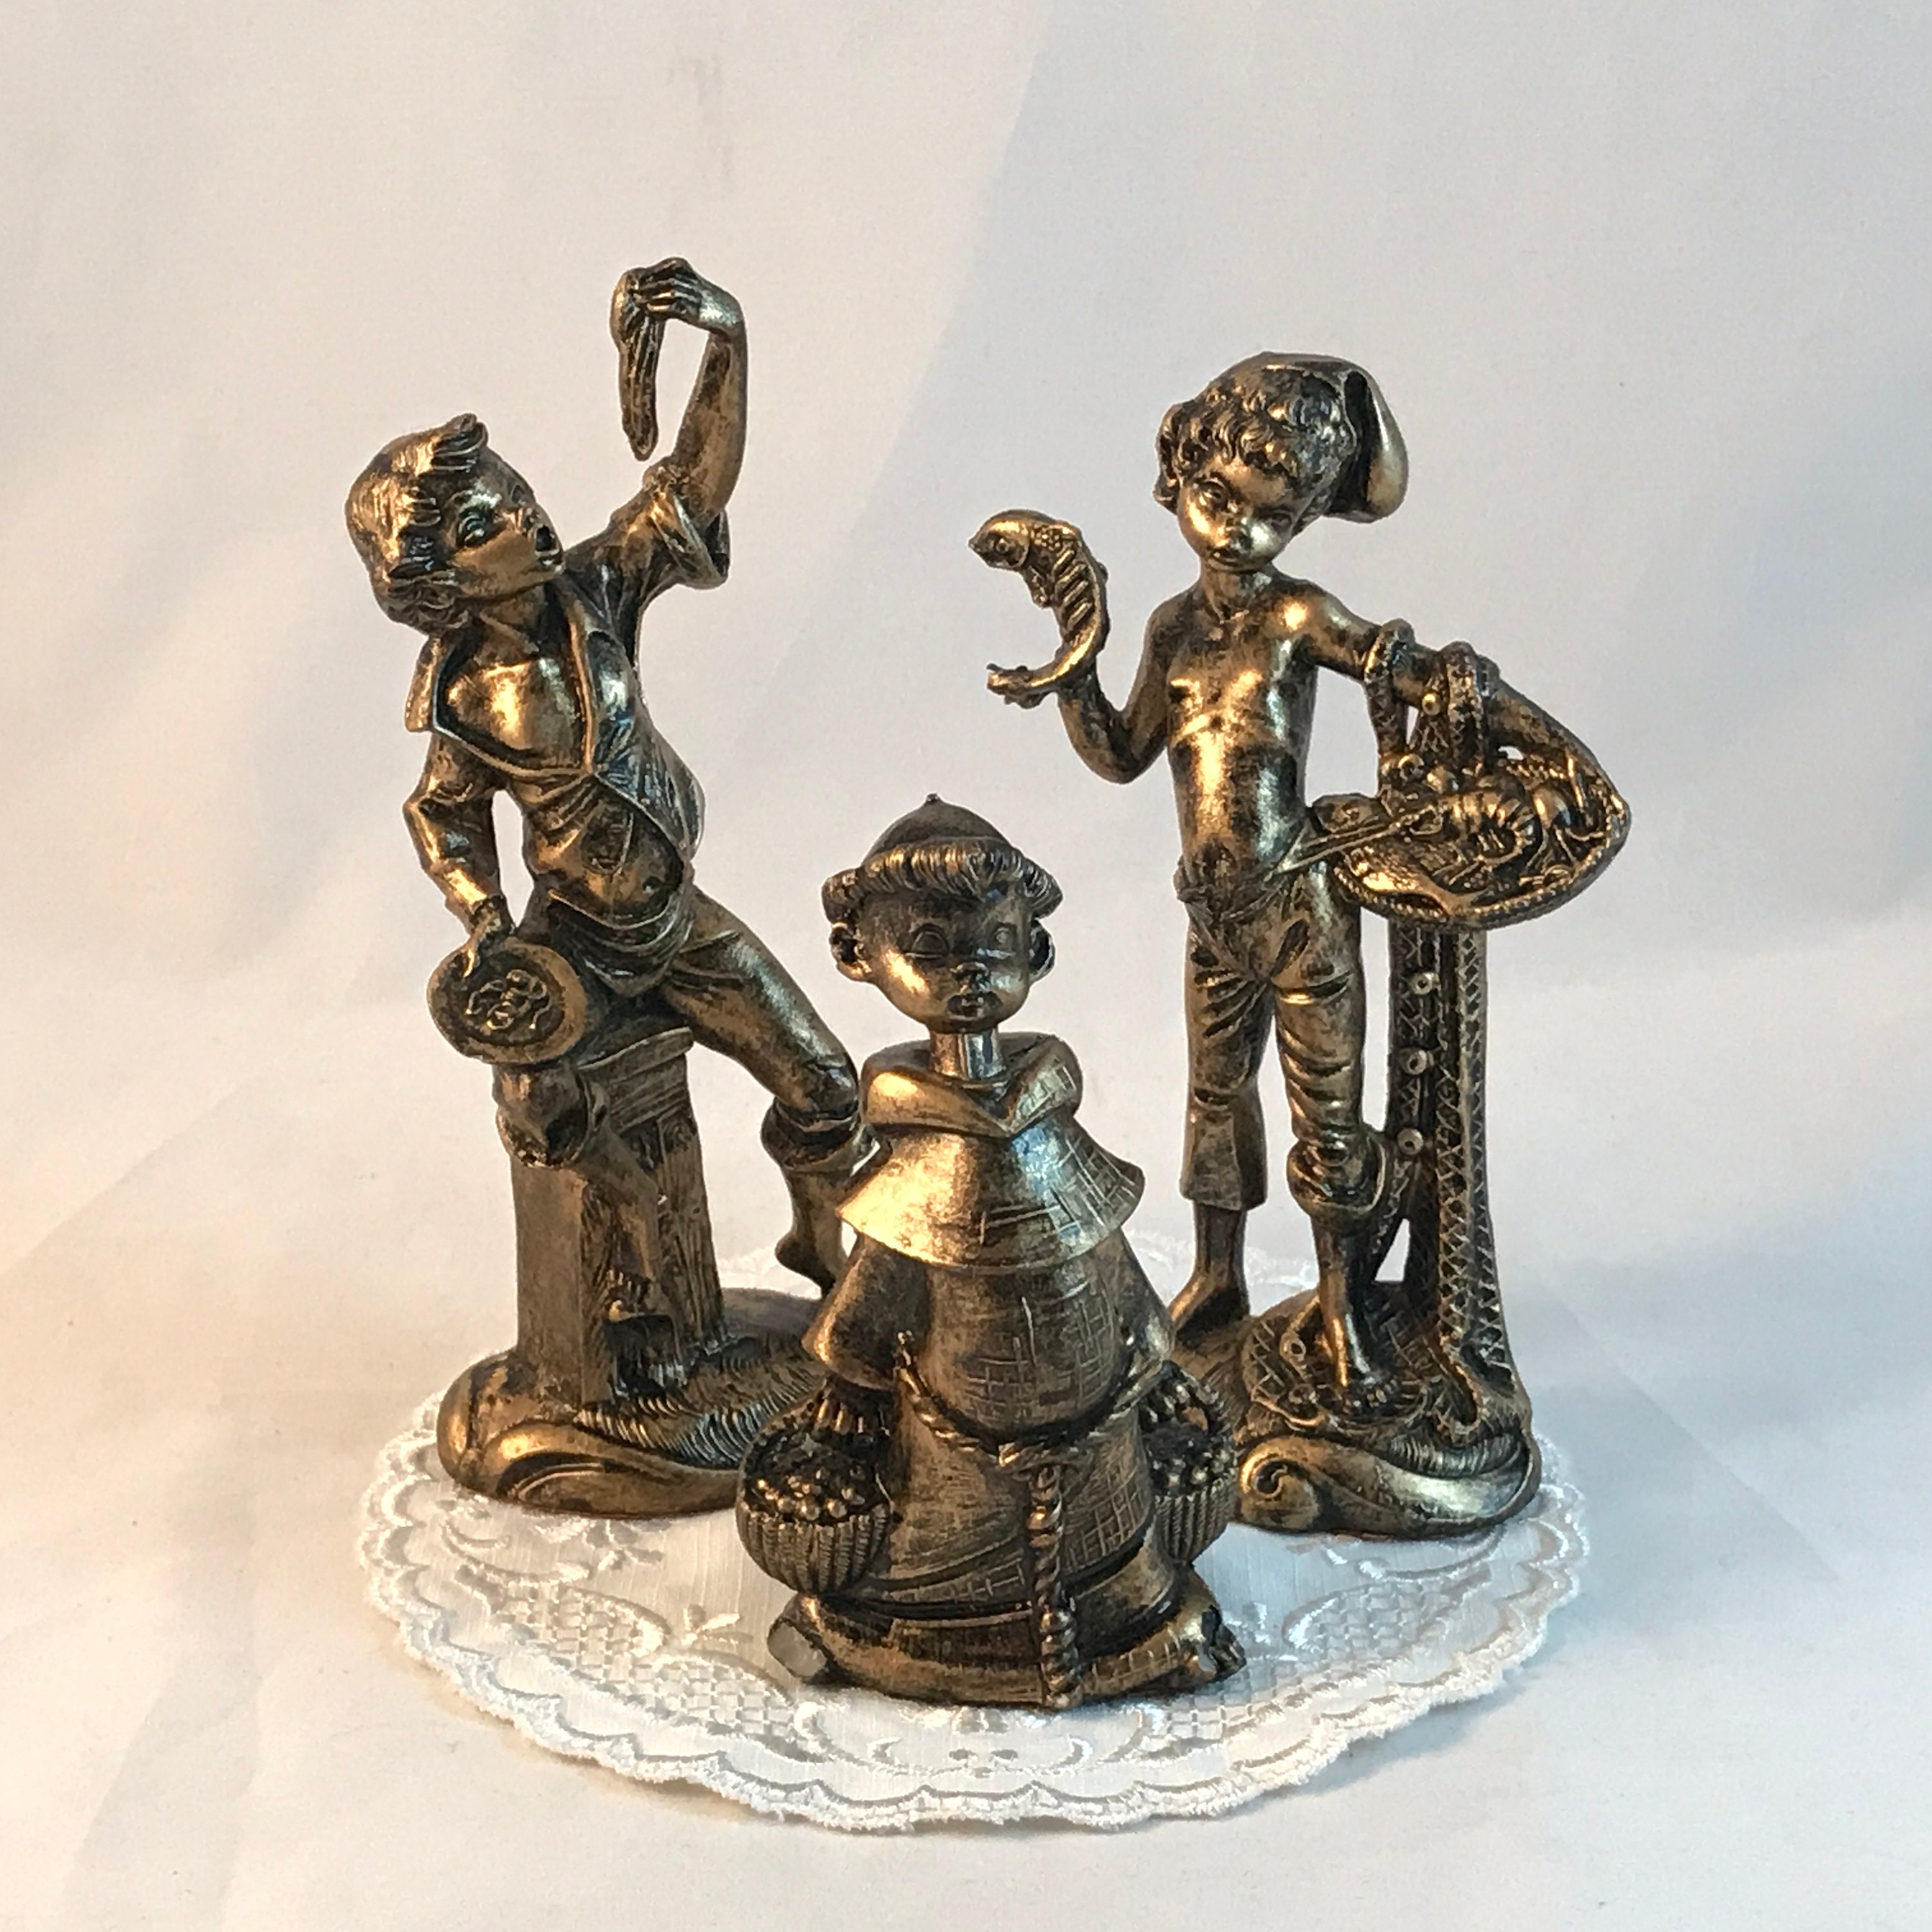 Vintage Bronze Resin Boy Sculptures Early American Culture Style - Set Of 3